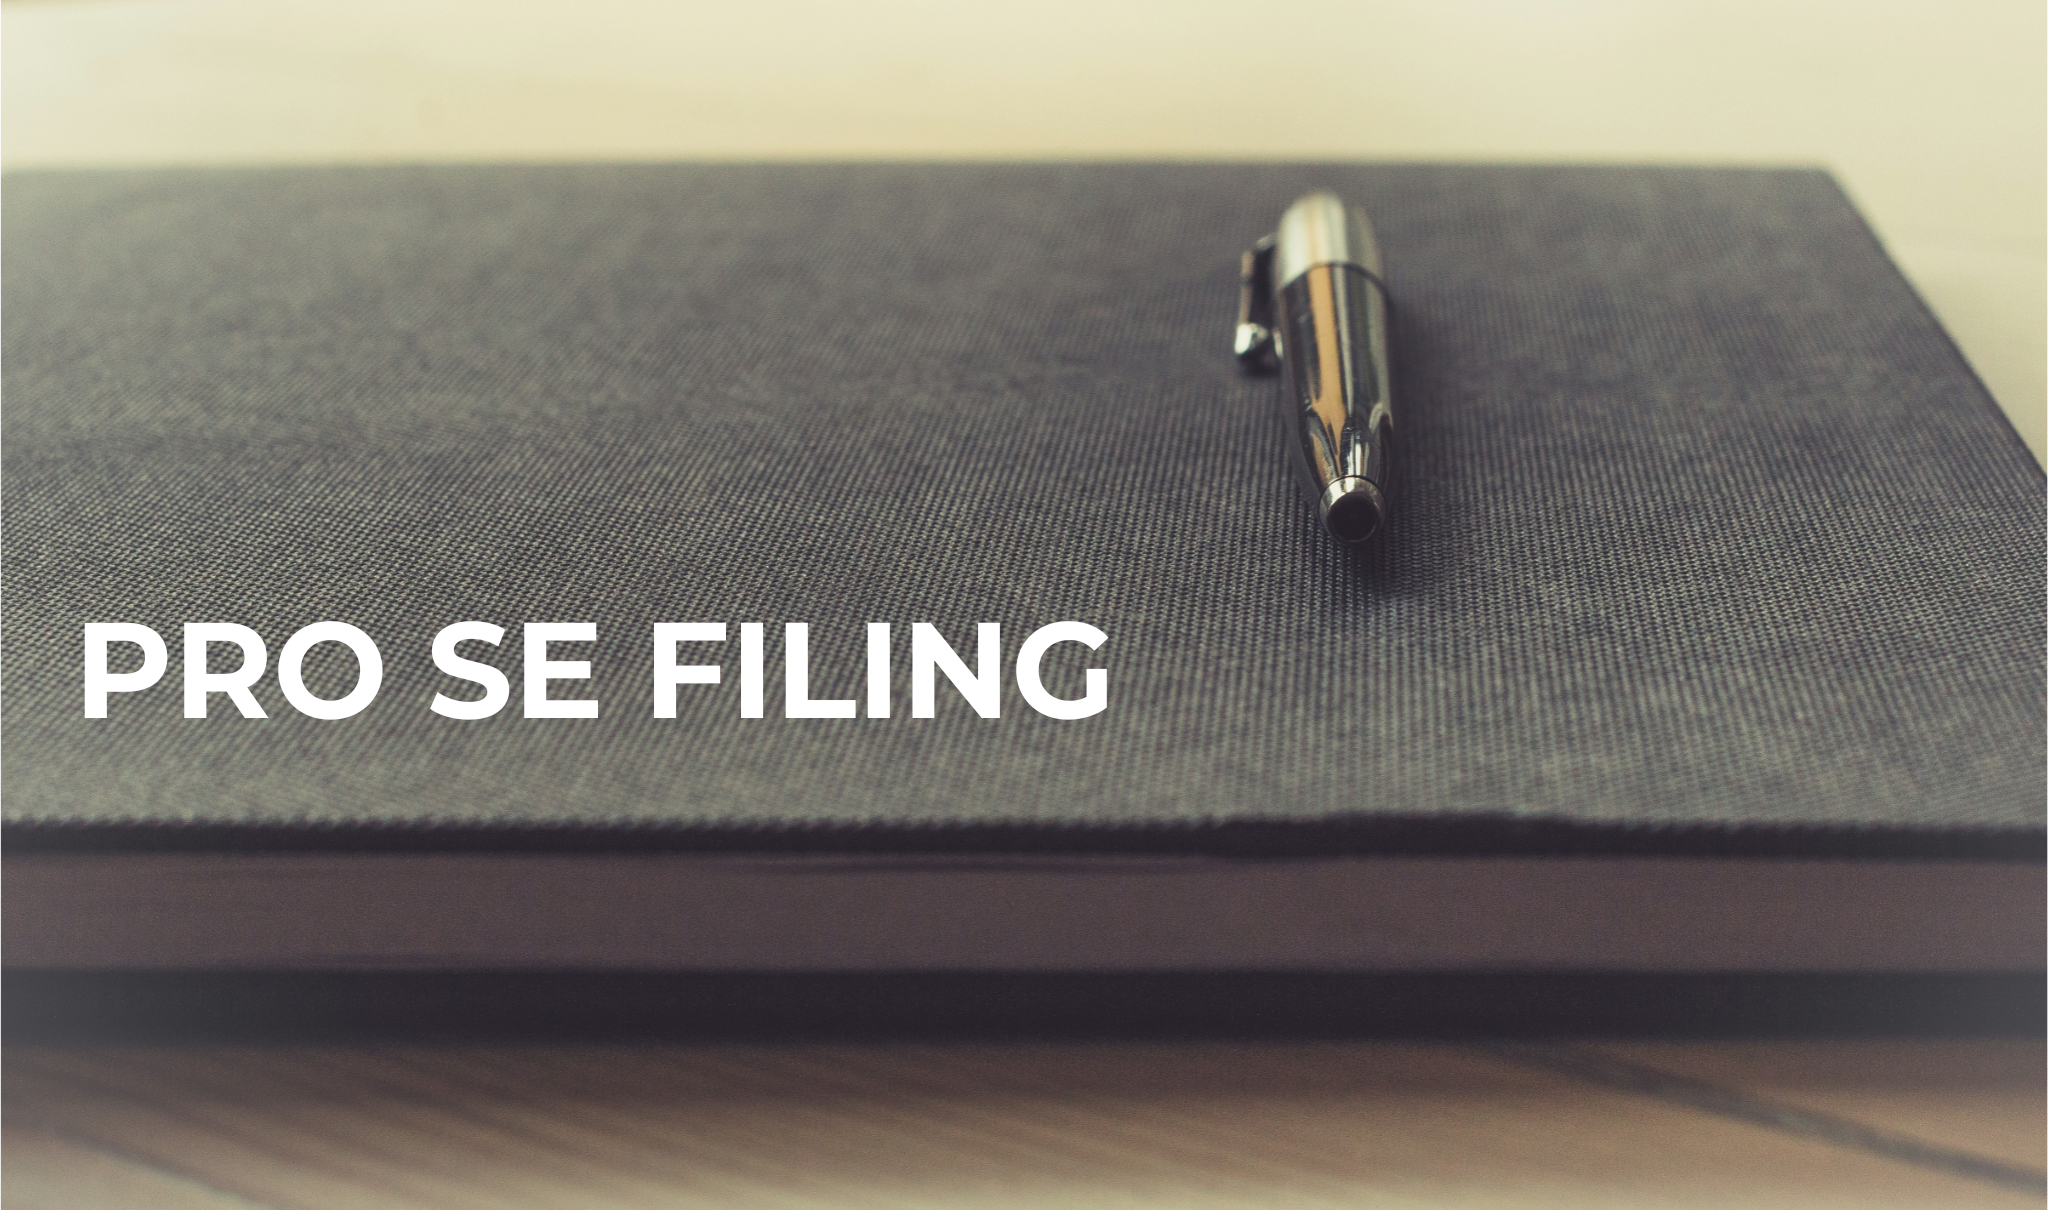 Pro Se Filing in Bankruptcy: Definition, Challenges and Tips